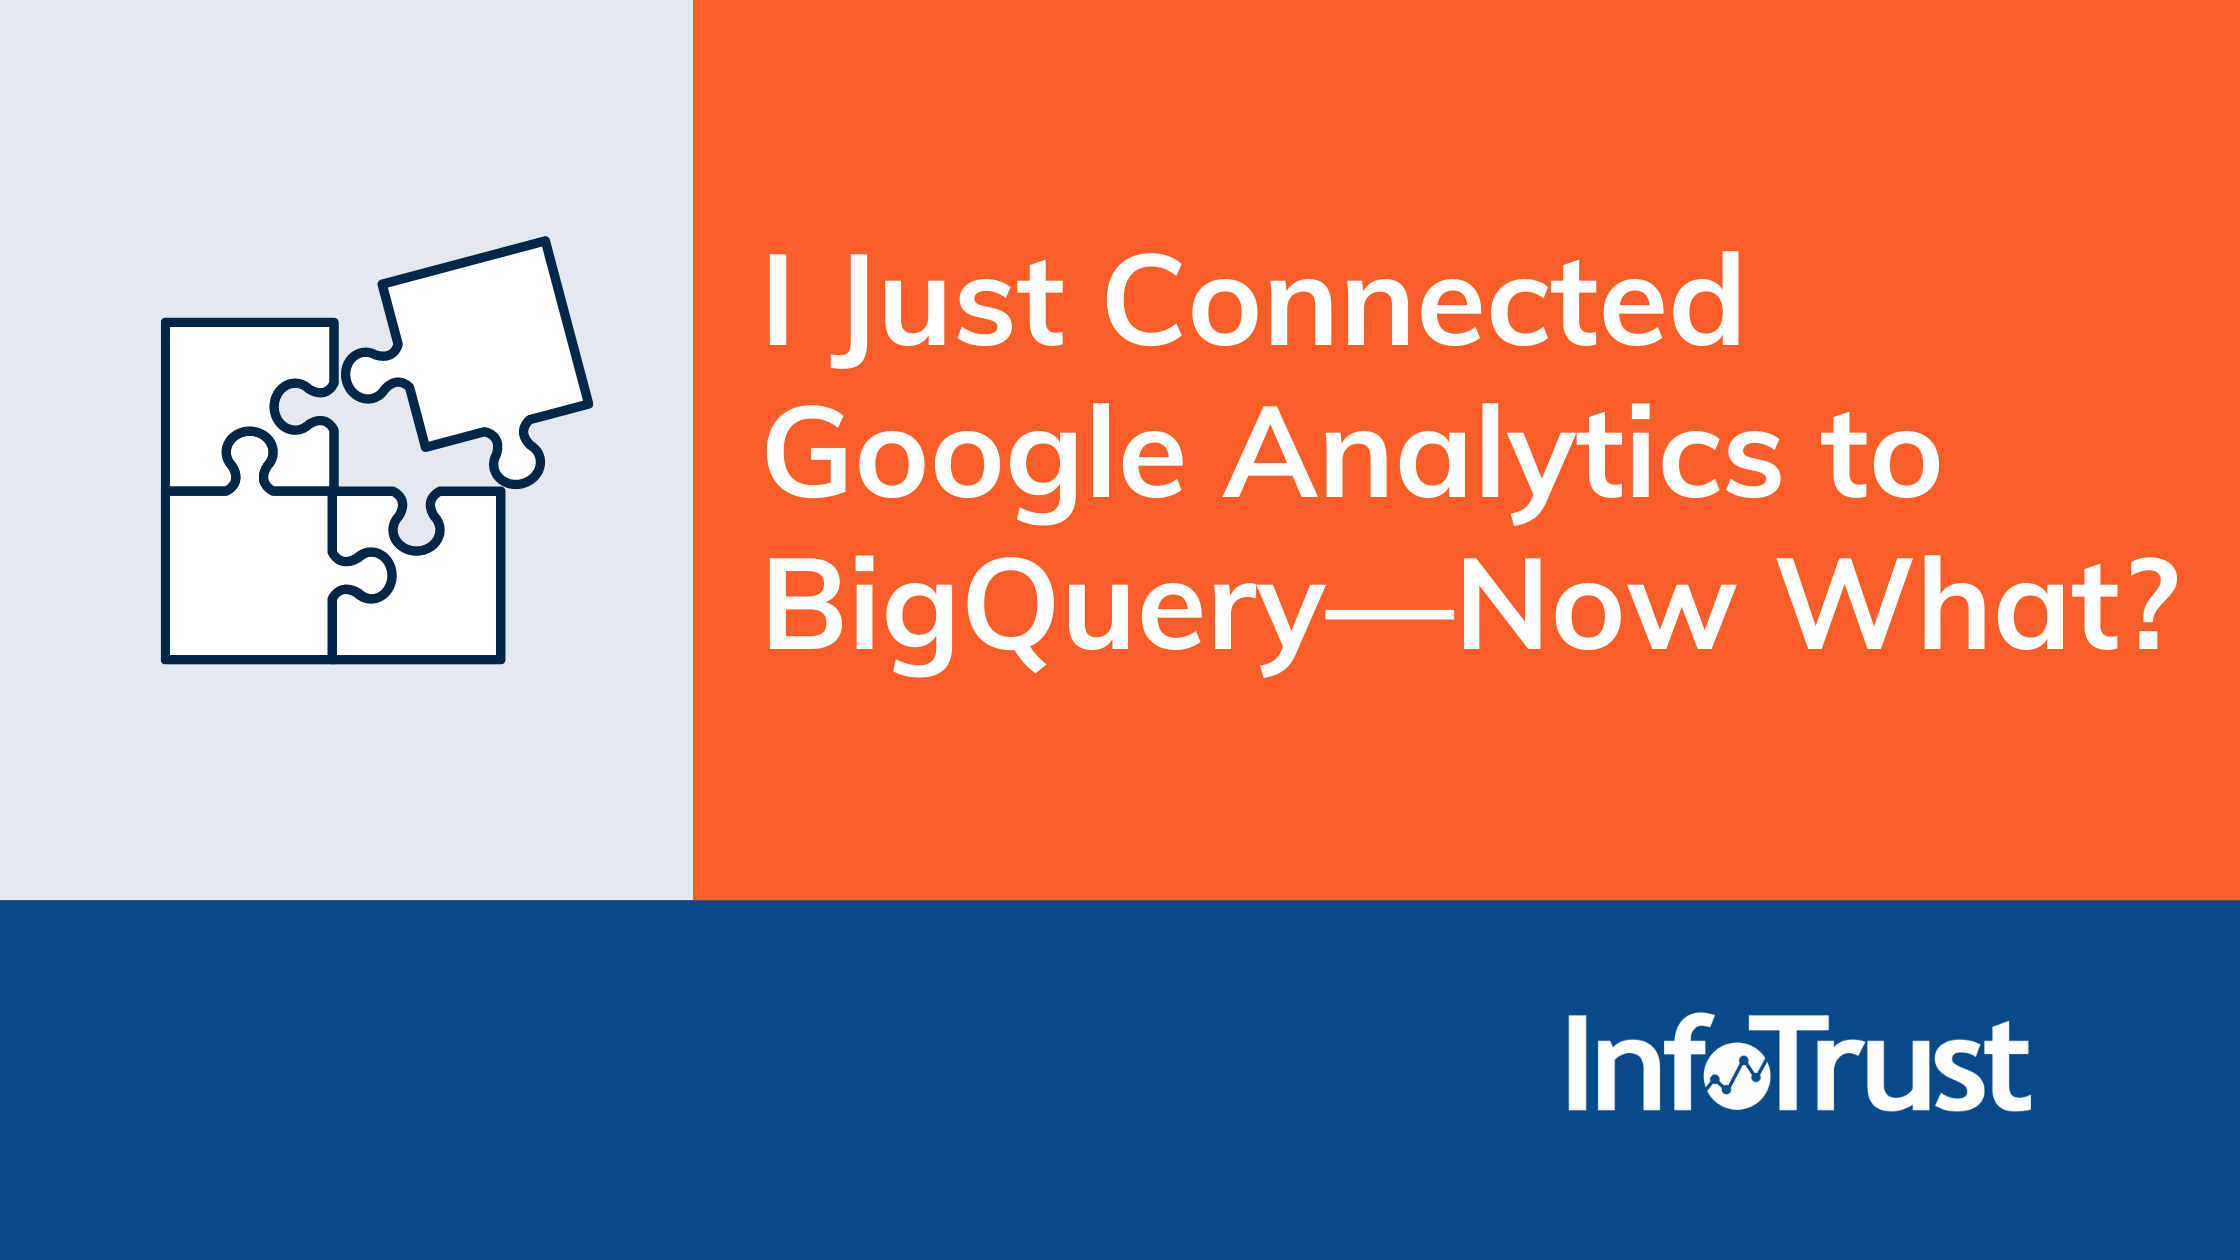 I Just Connected Google Analytics to BigQuery—Now What?